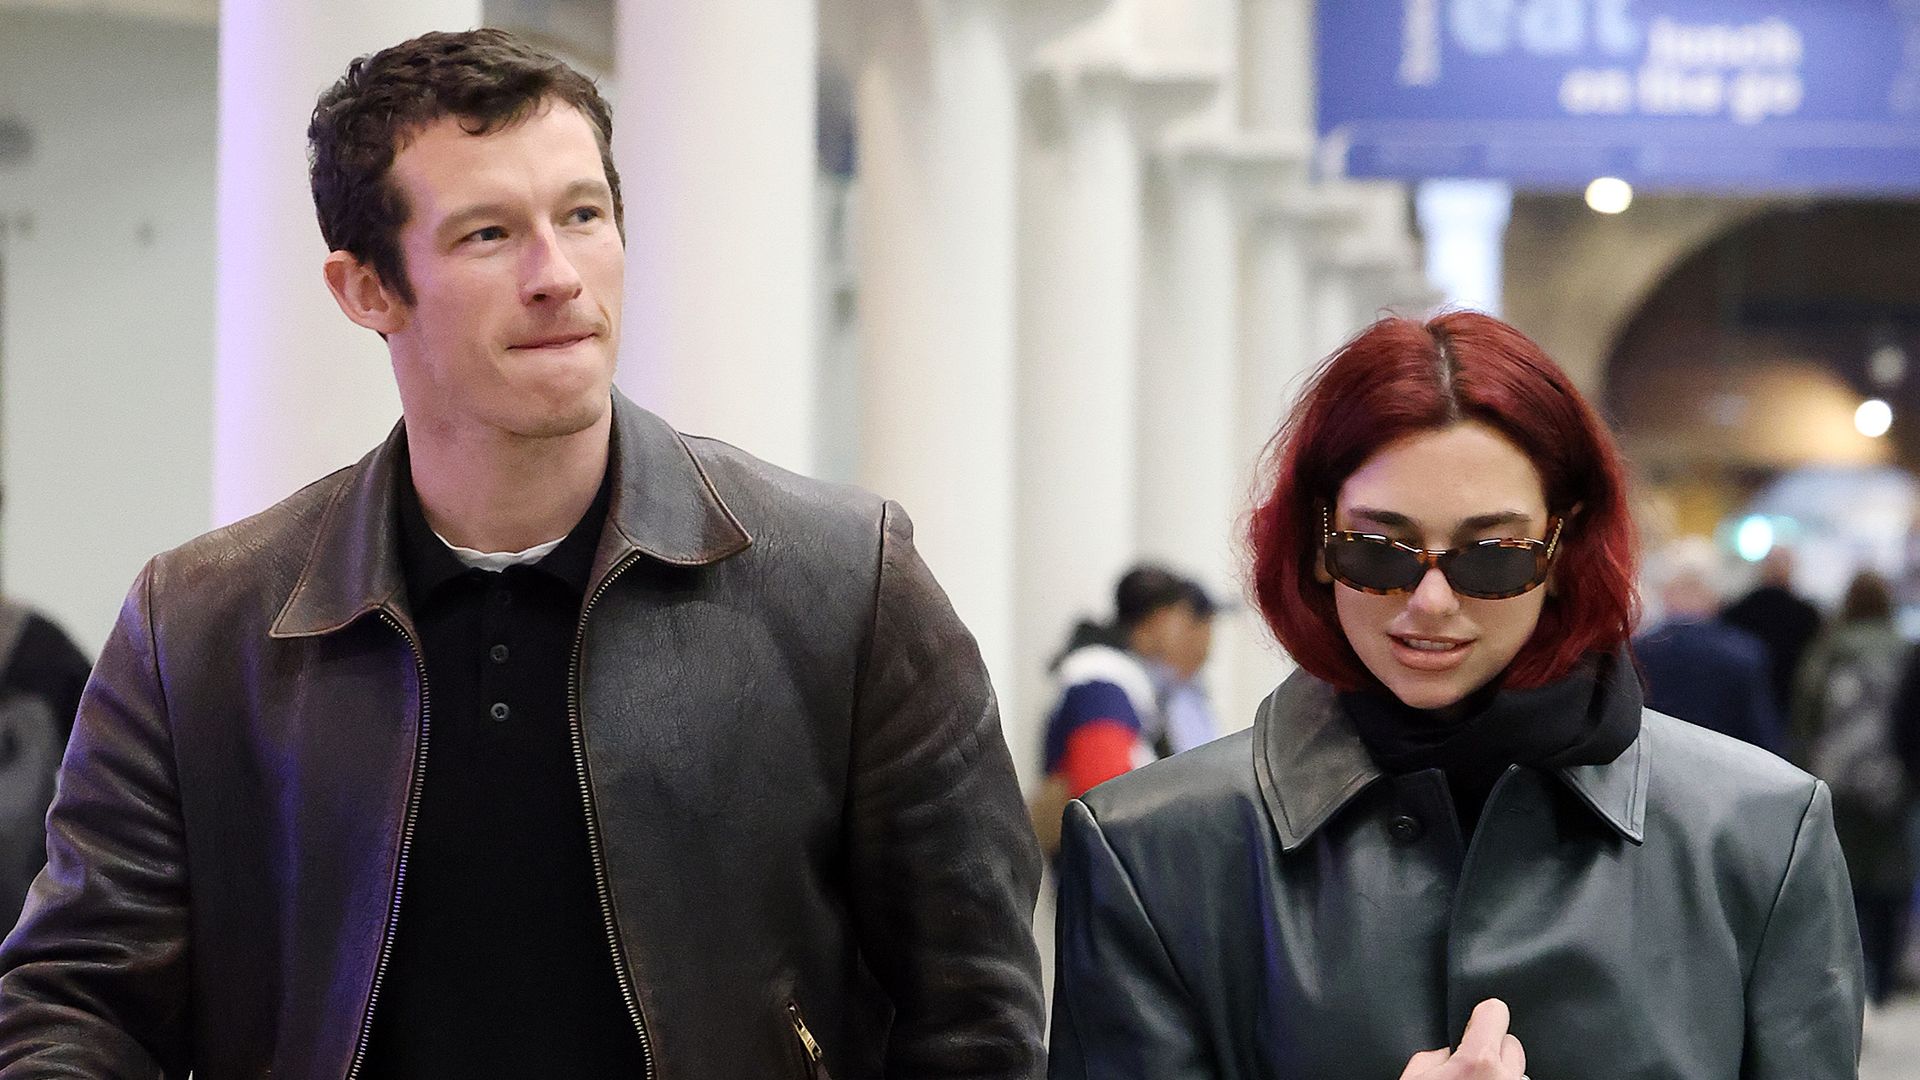 Dua Lipa and Callum Turner arriving at London St Pancras Station after taking the Eurostar from Paris on March 26, 2024 in London, England. (Photo by Neil Mockford/GC Images)